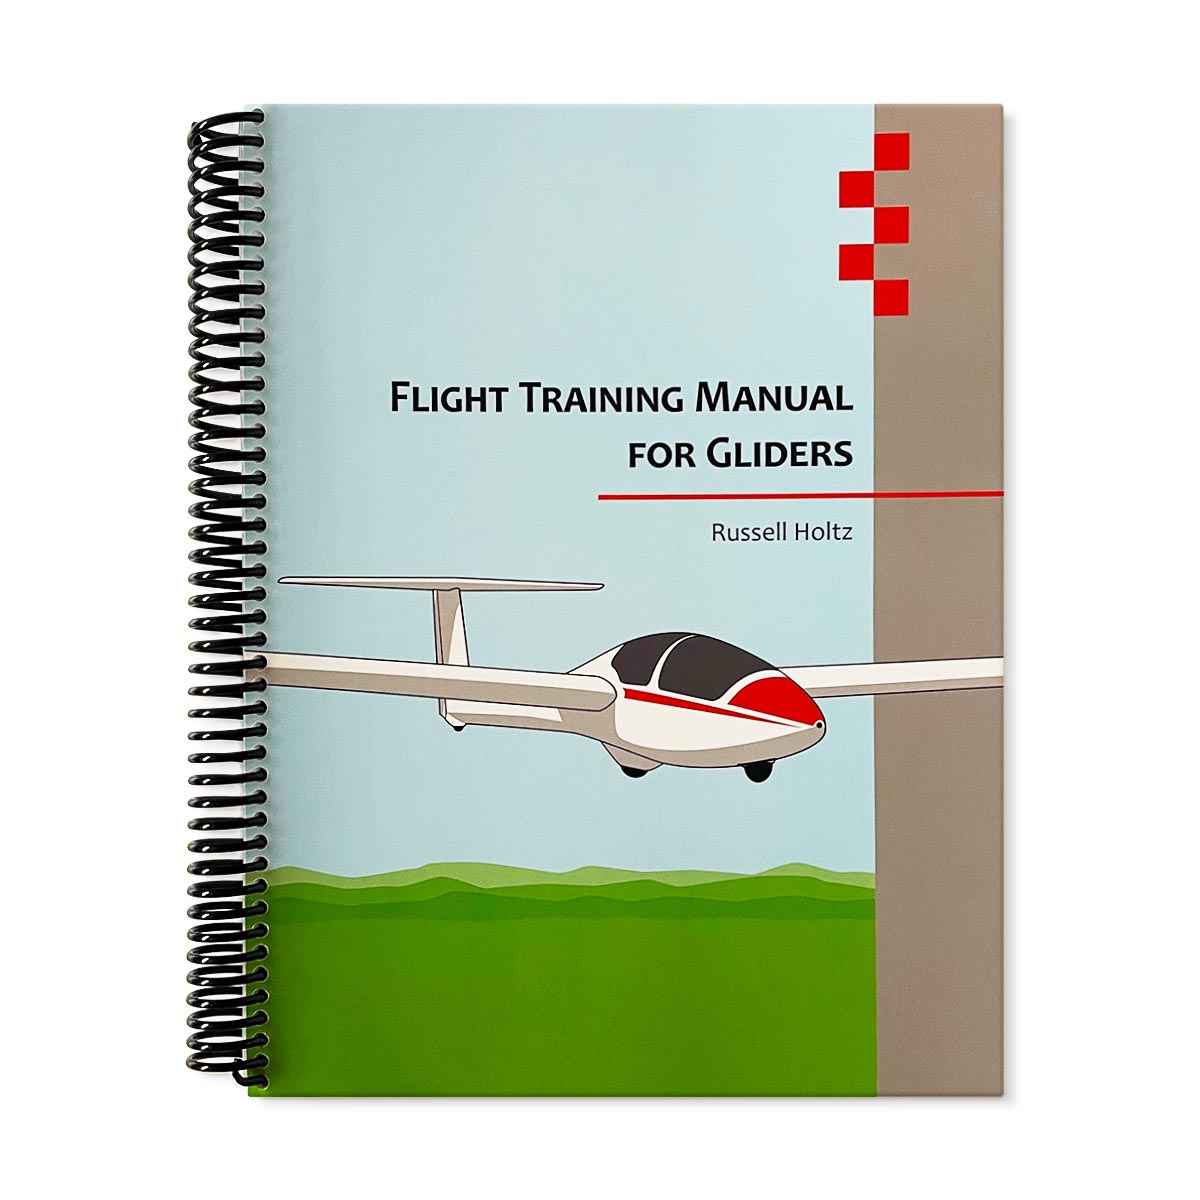 Flight Training Manual For Gliders By Russell Holtz manual for gliders